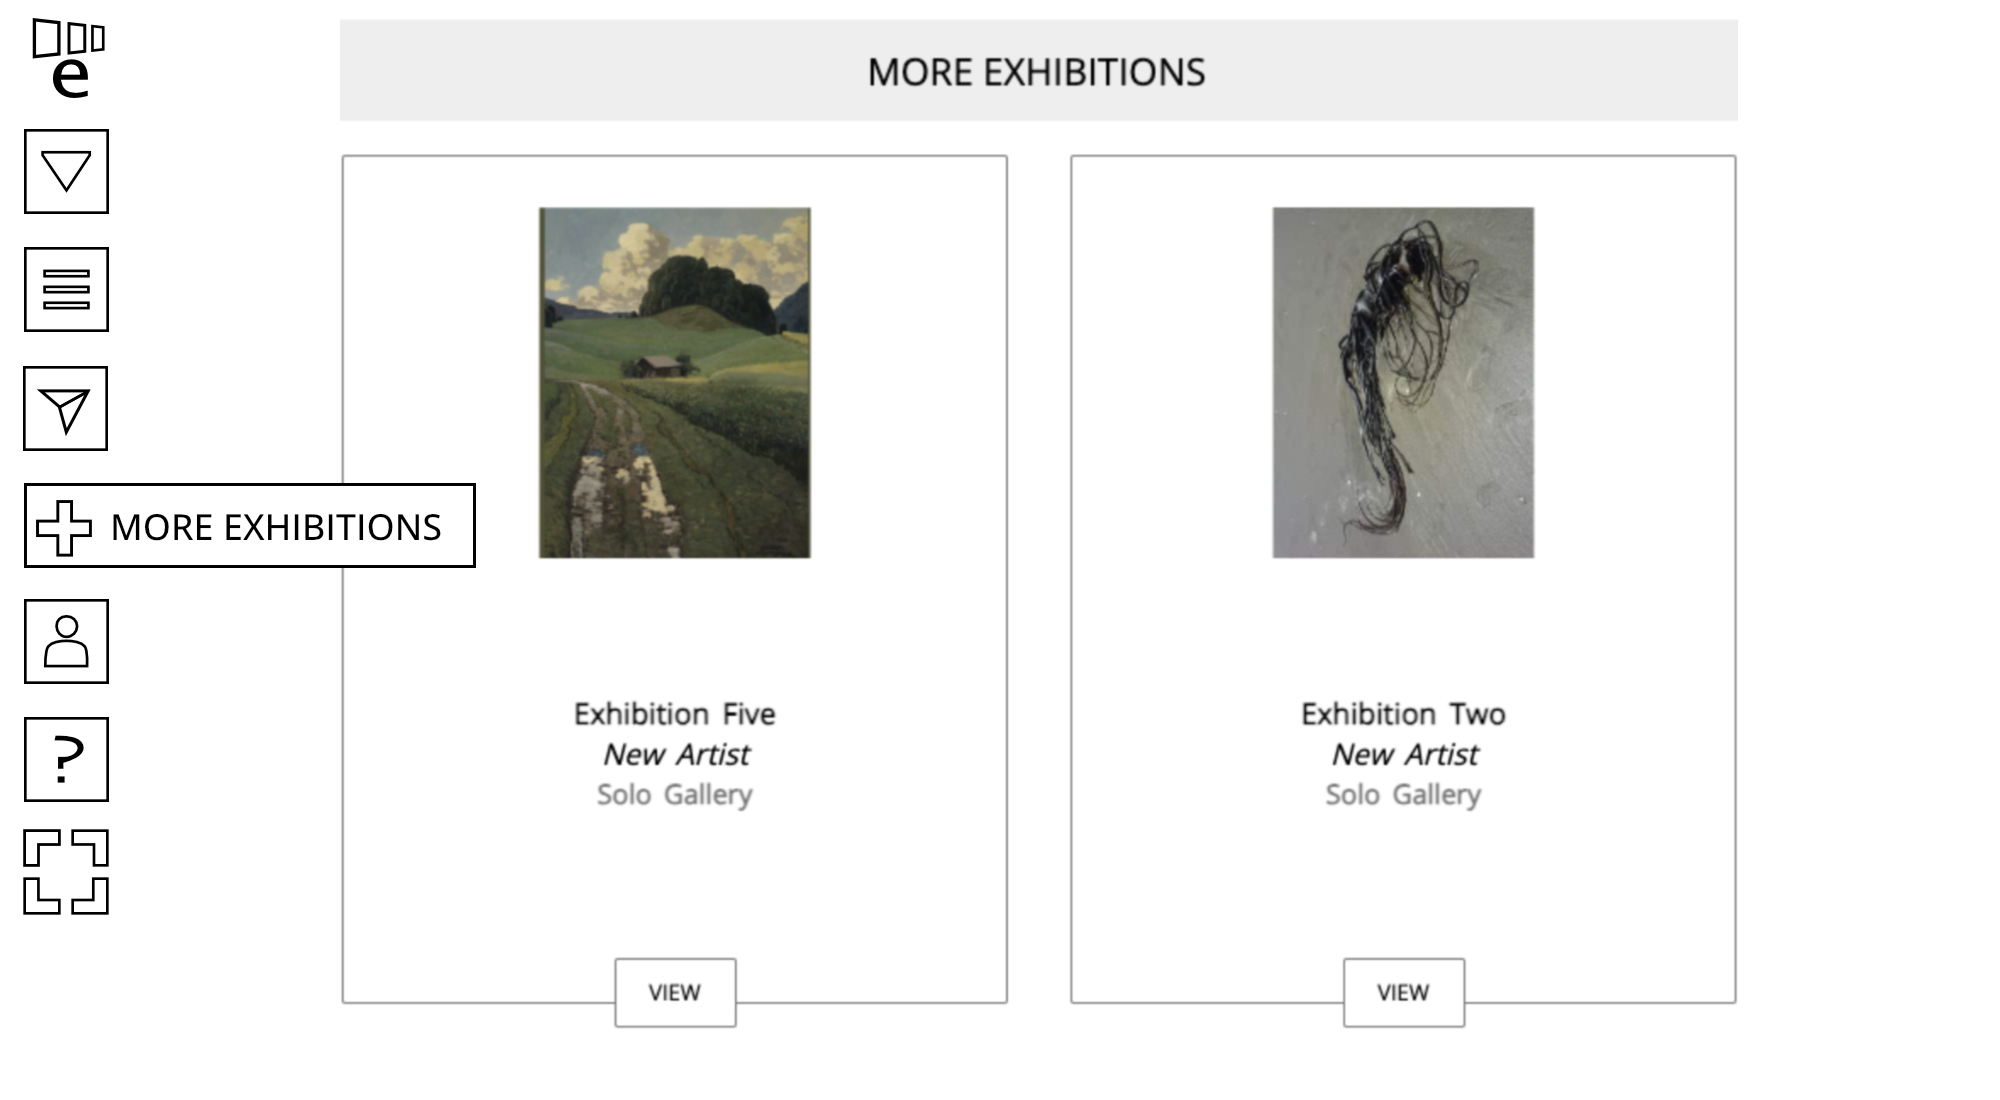 More exhibitions tab on the menu